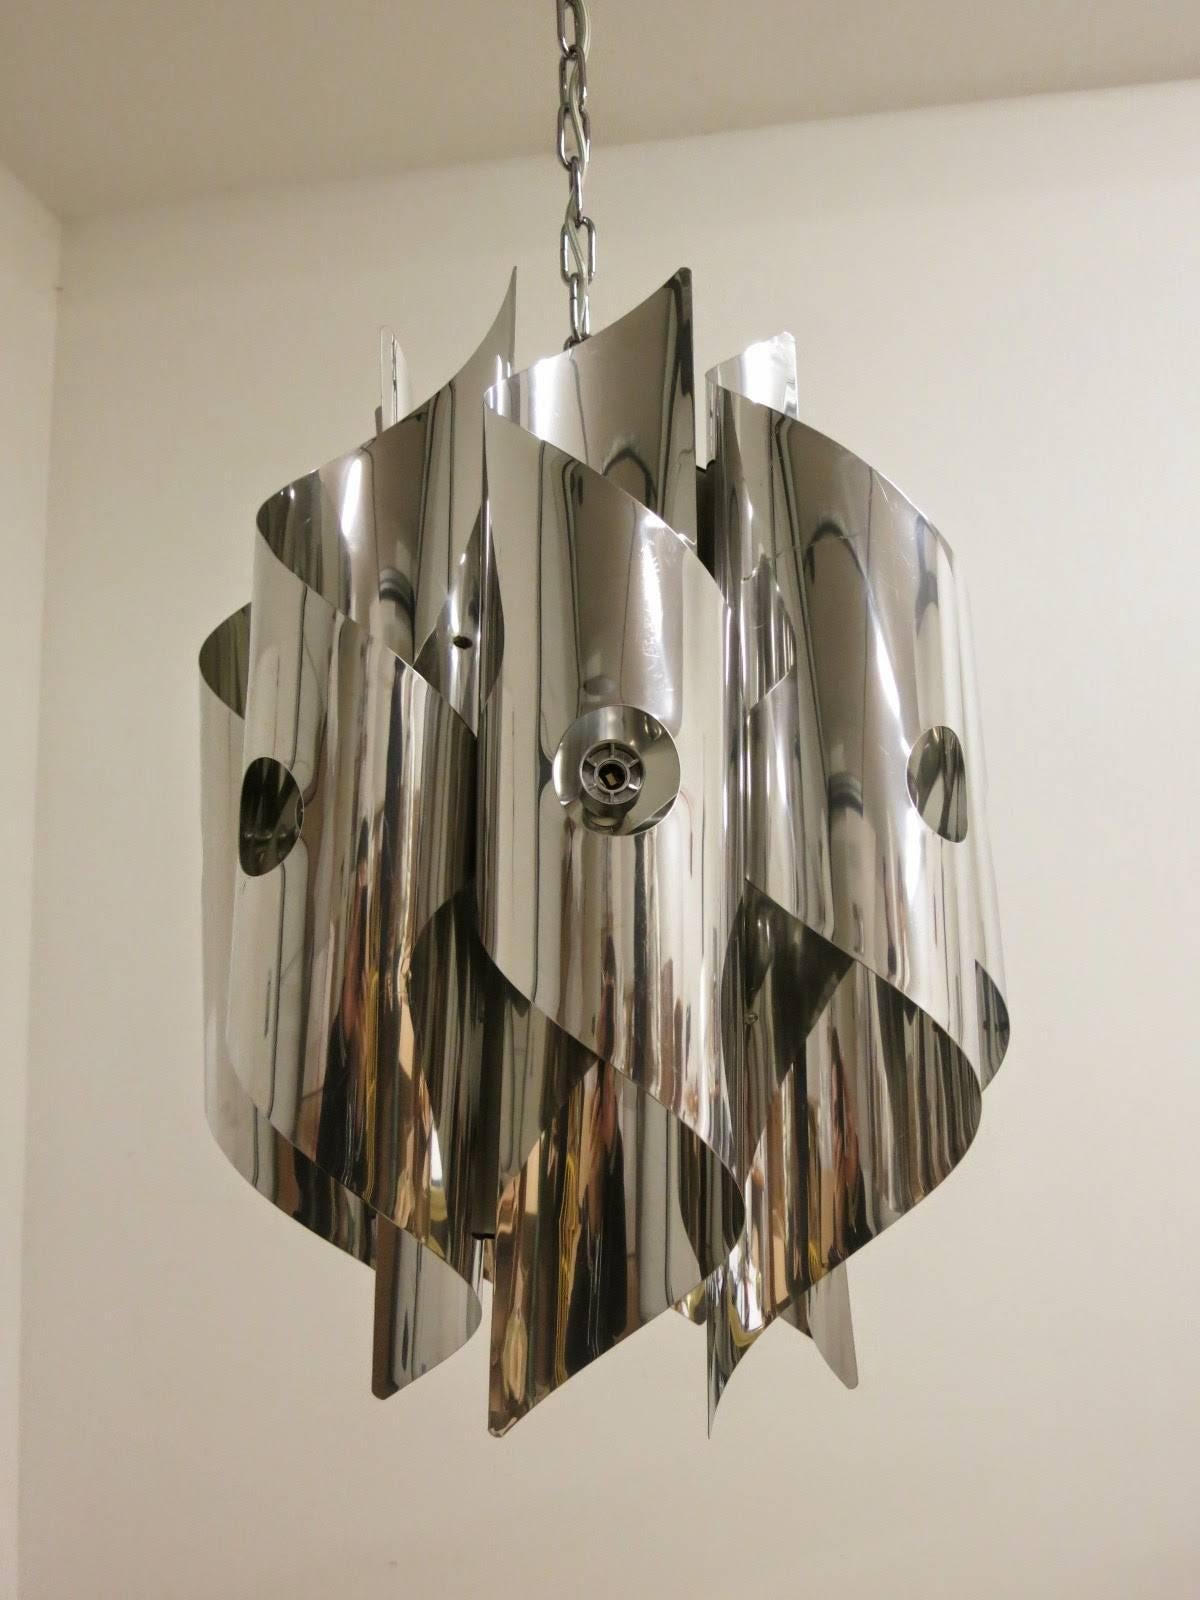 Vintage Italian pendant with 8 chrome chrome spirals / Designed by Sciolari circa 1970’s / Made in Italy
8 lights / E12 or E14 type / max 40W each
Diameter: 16 inches / Height: 22 inches plus chain and canopy
1 in stock in Palm Springs currently ON